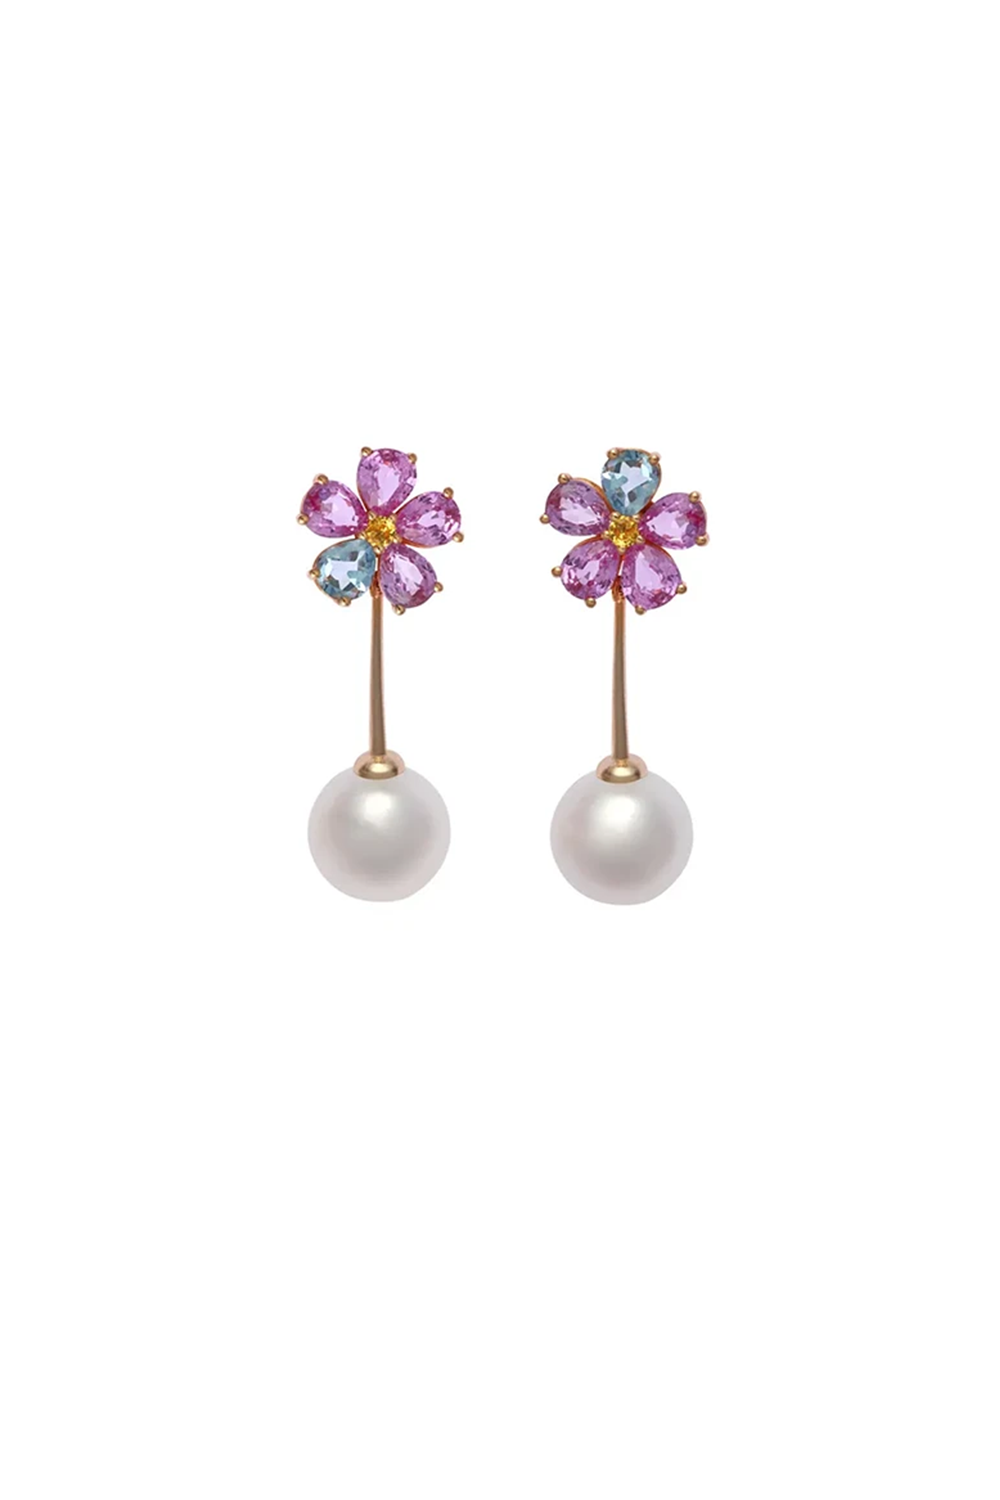 Forget Me Not Pink Sapphire Pearl Earrings